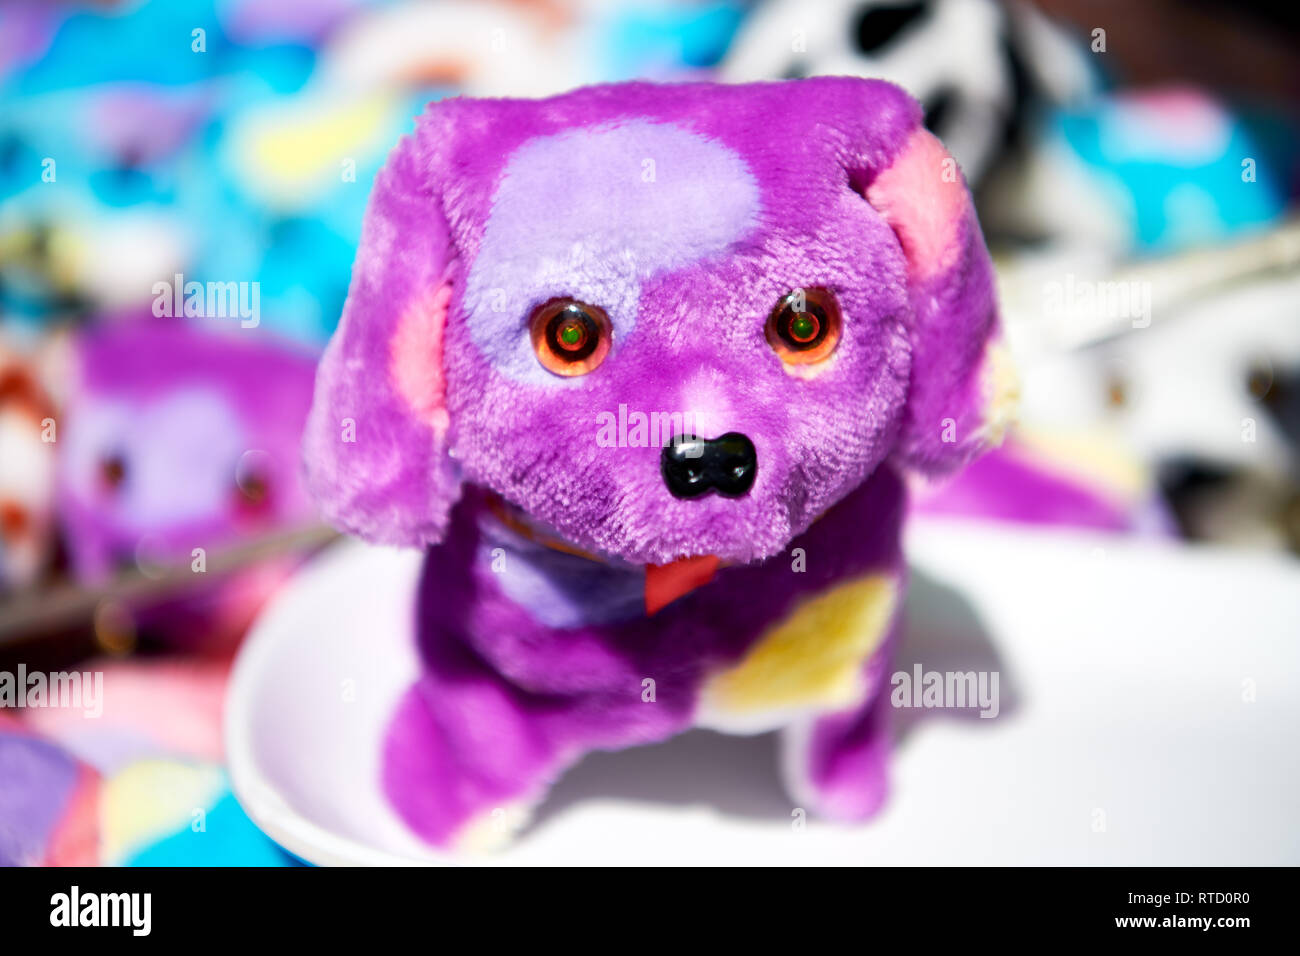 Close-up of one small super cute purple cored stuffed toy dog, standing on a white ground, with other toys out of focus in the background Stock Photo